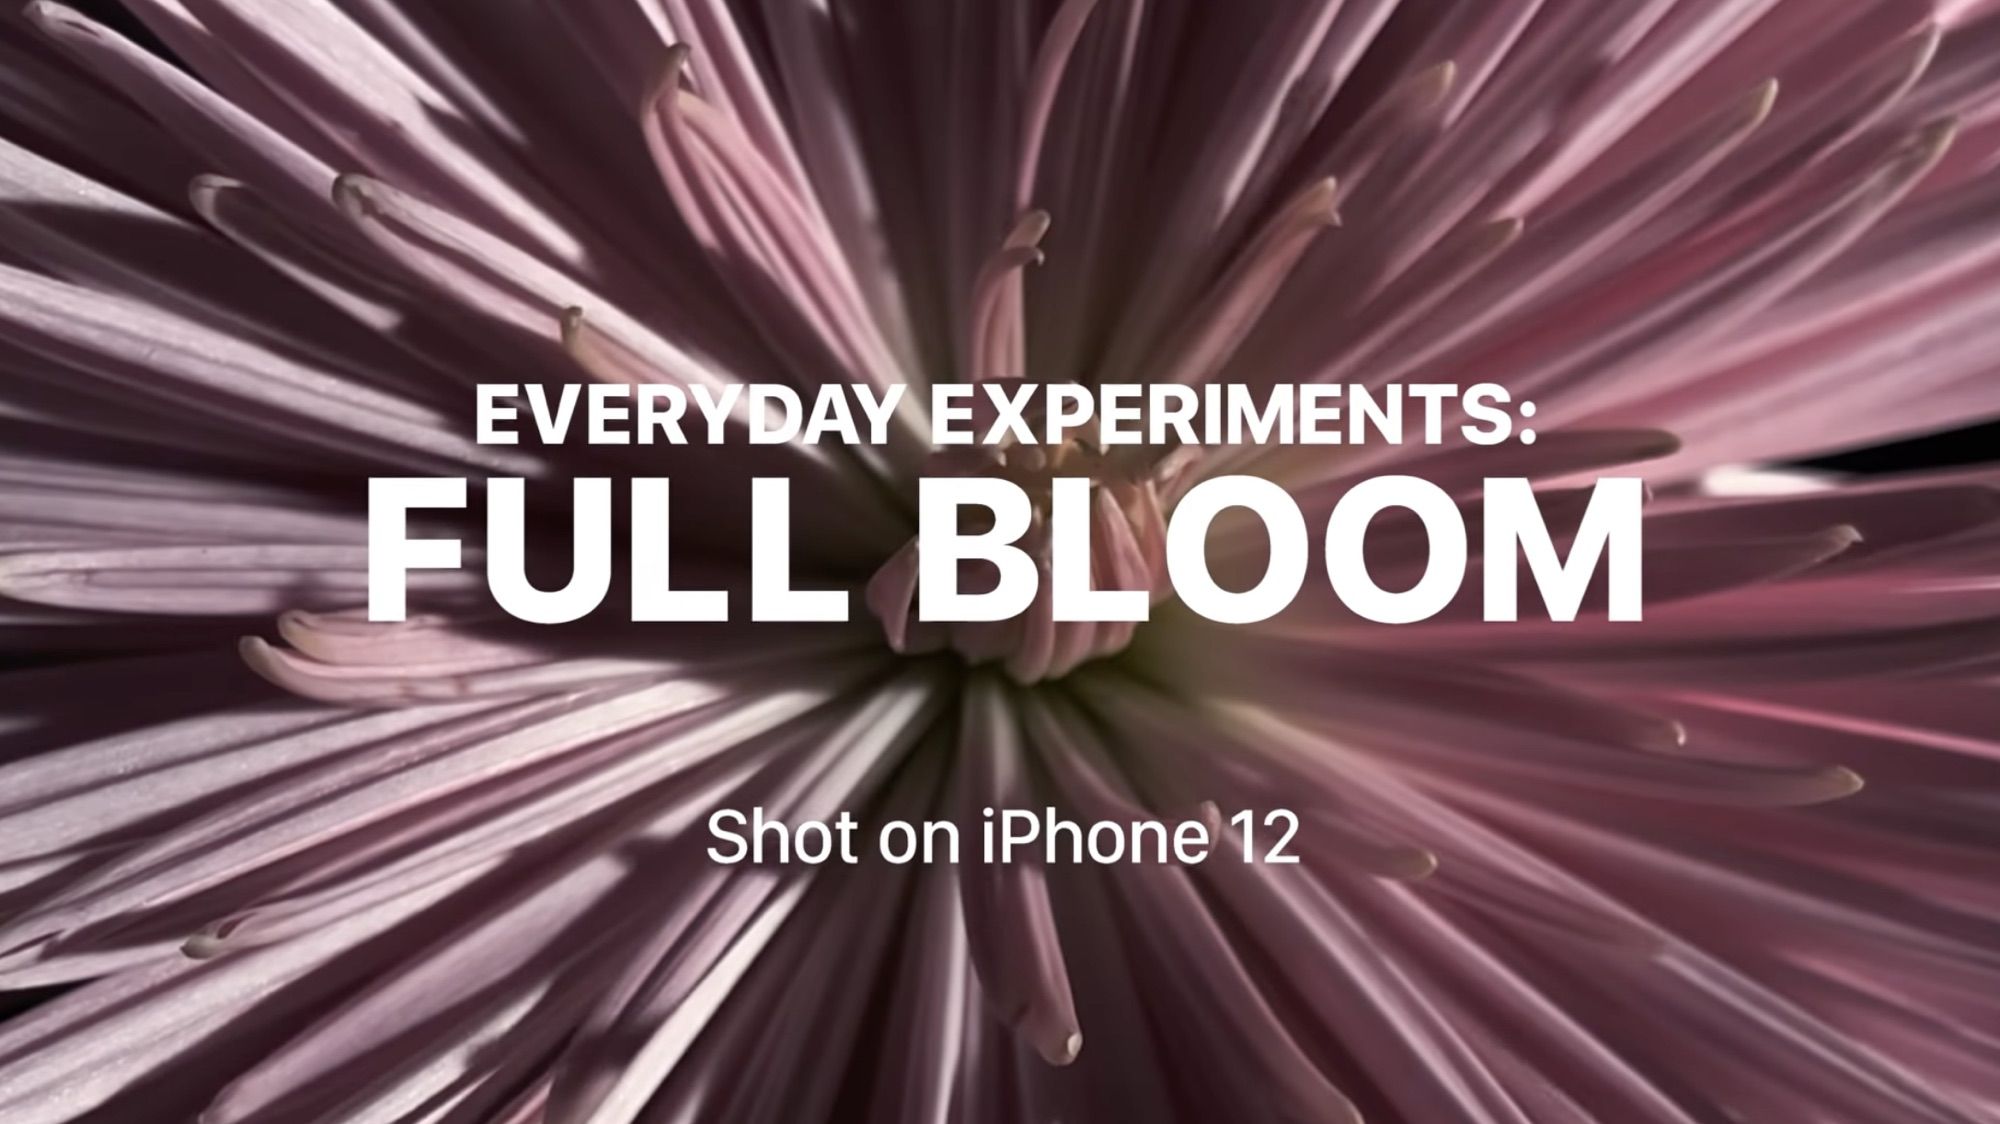 photo of Apple Shares 'Full Bloom' Shot on iPhone 12 Video Featuring Flowers image